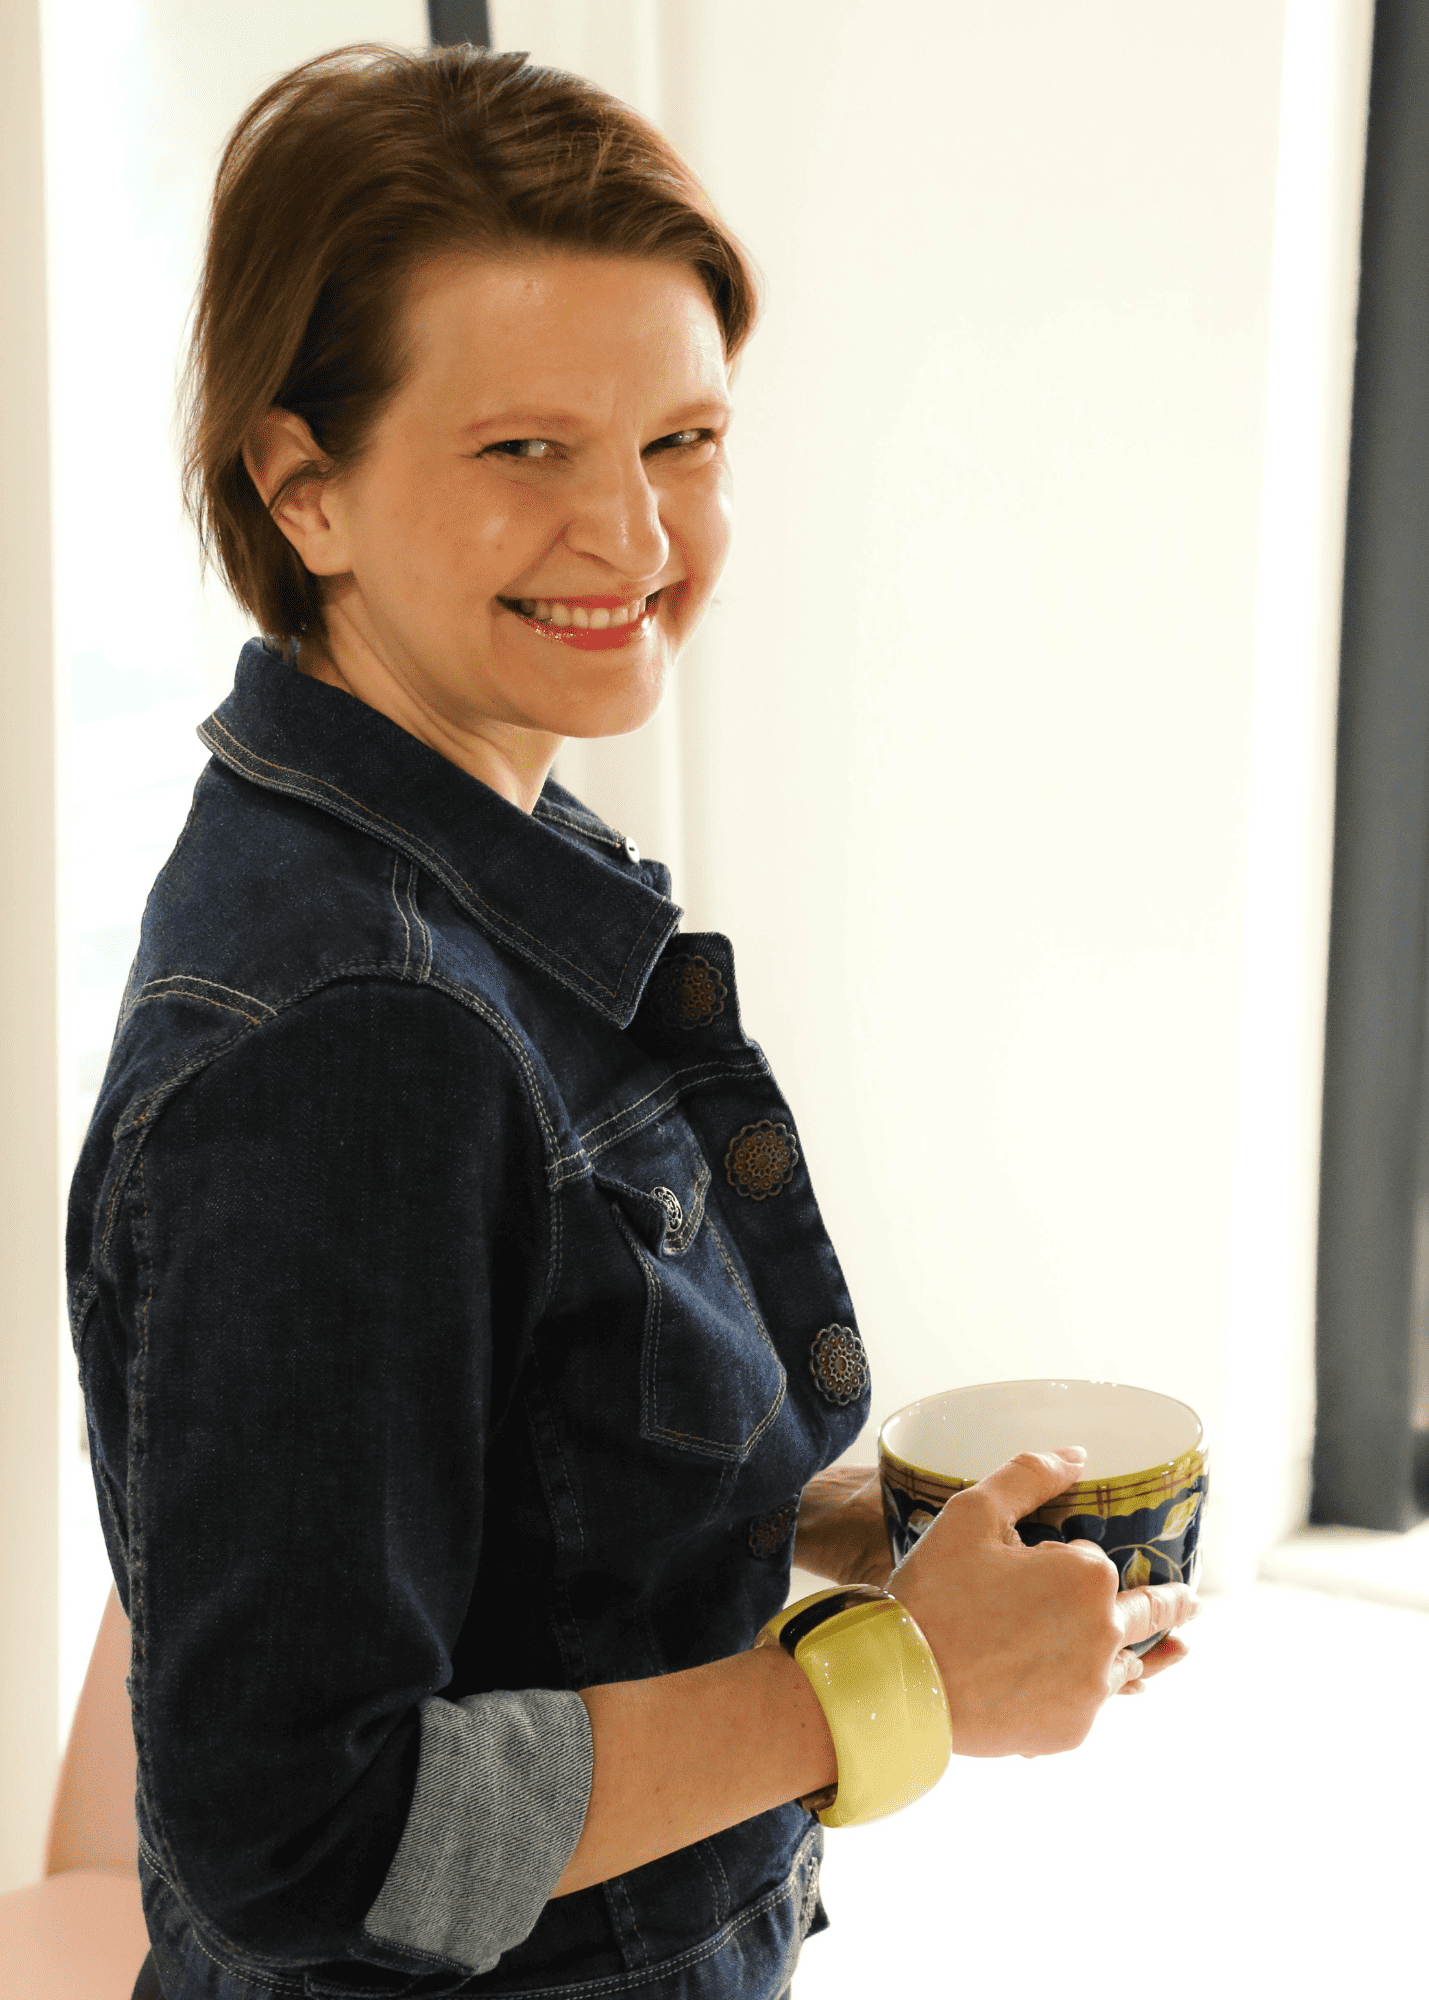 Heather smiling holding coffee cup